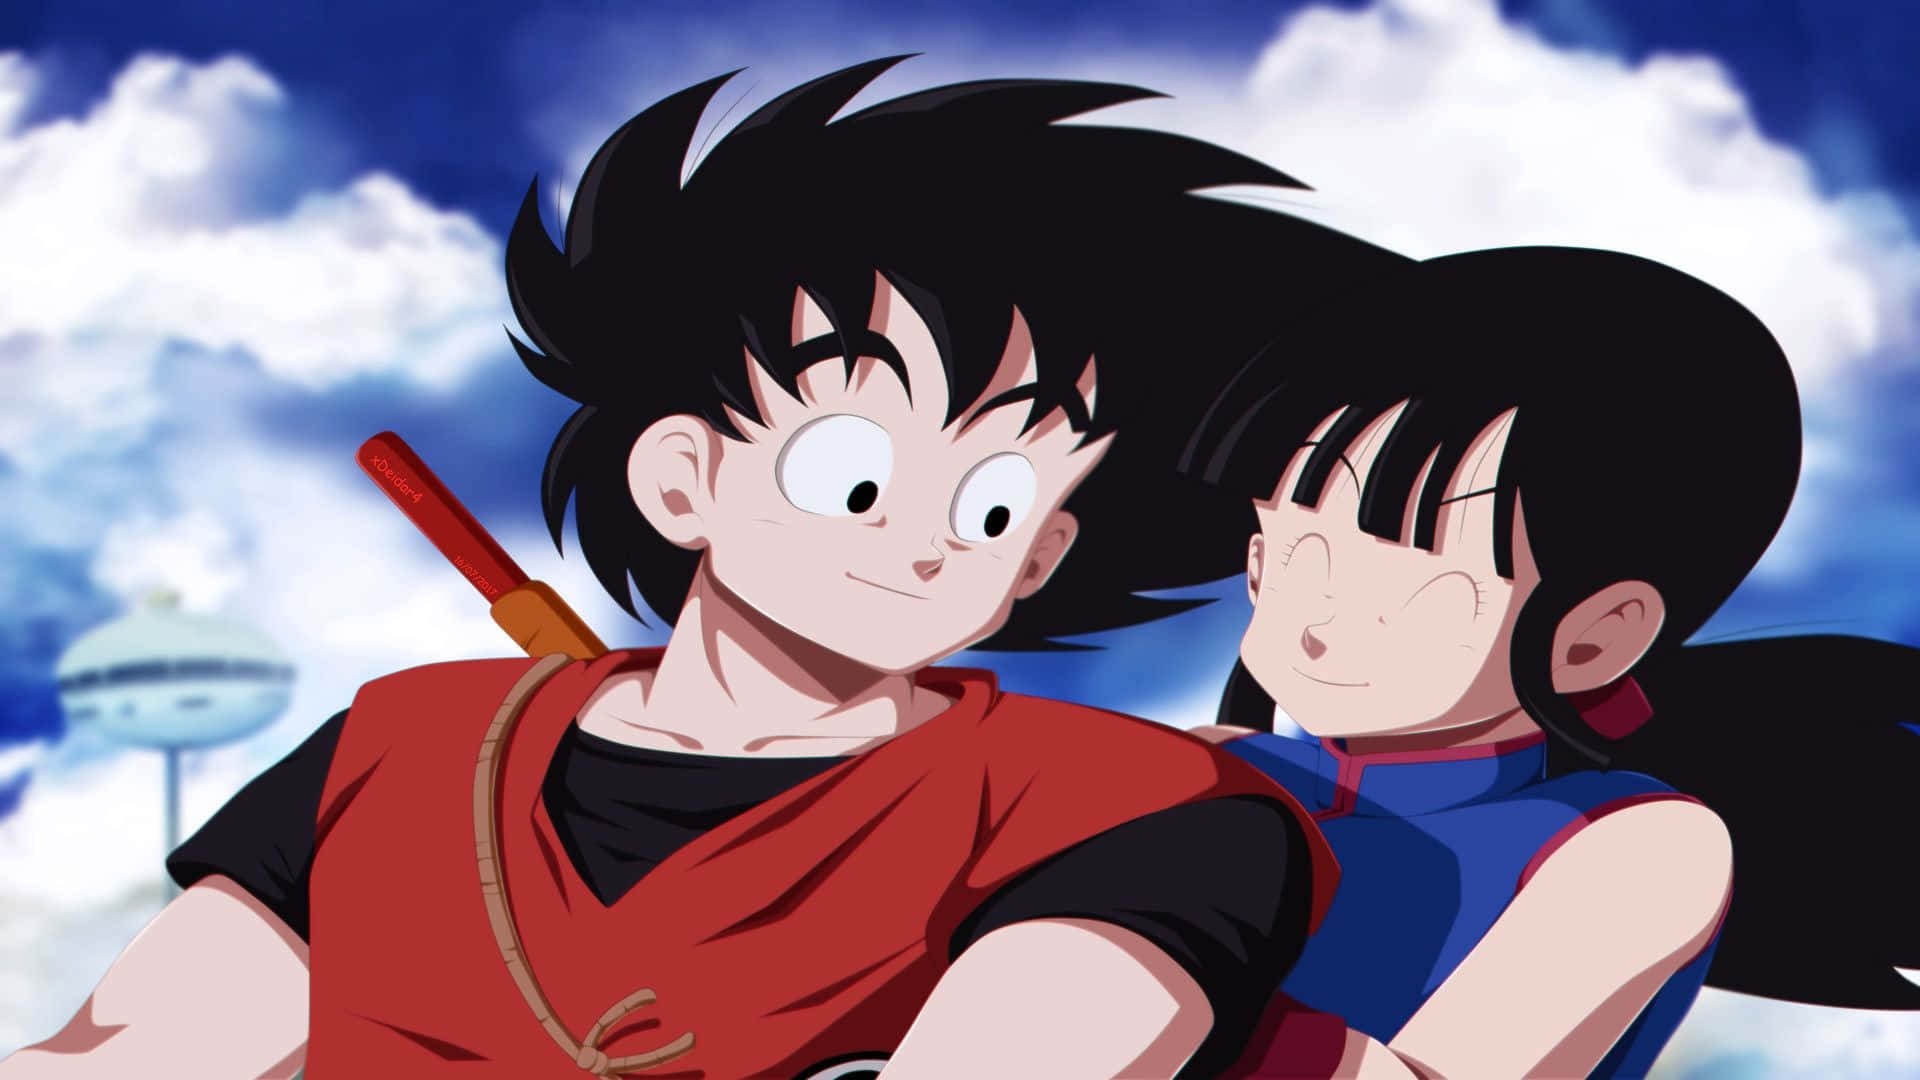 Goku and Chichi in an Epic Moment of Love, Peace and Togetherness Wallpaper